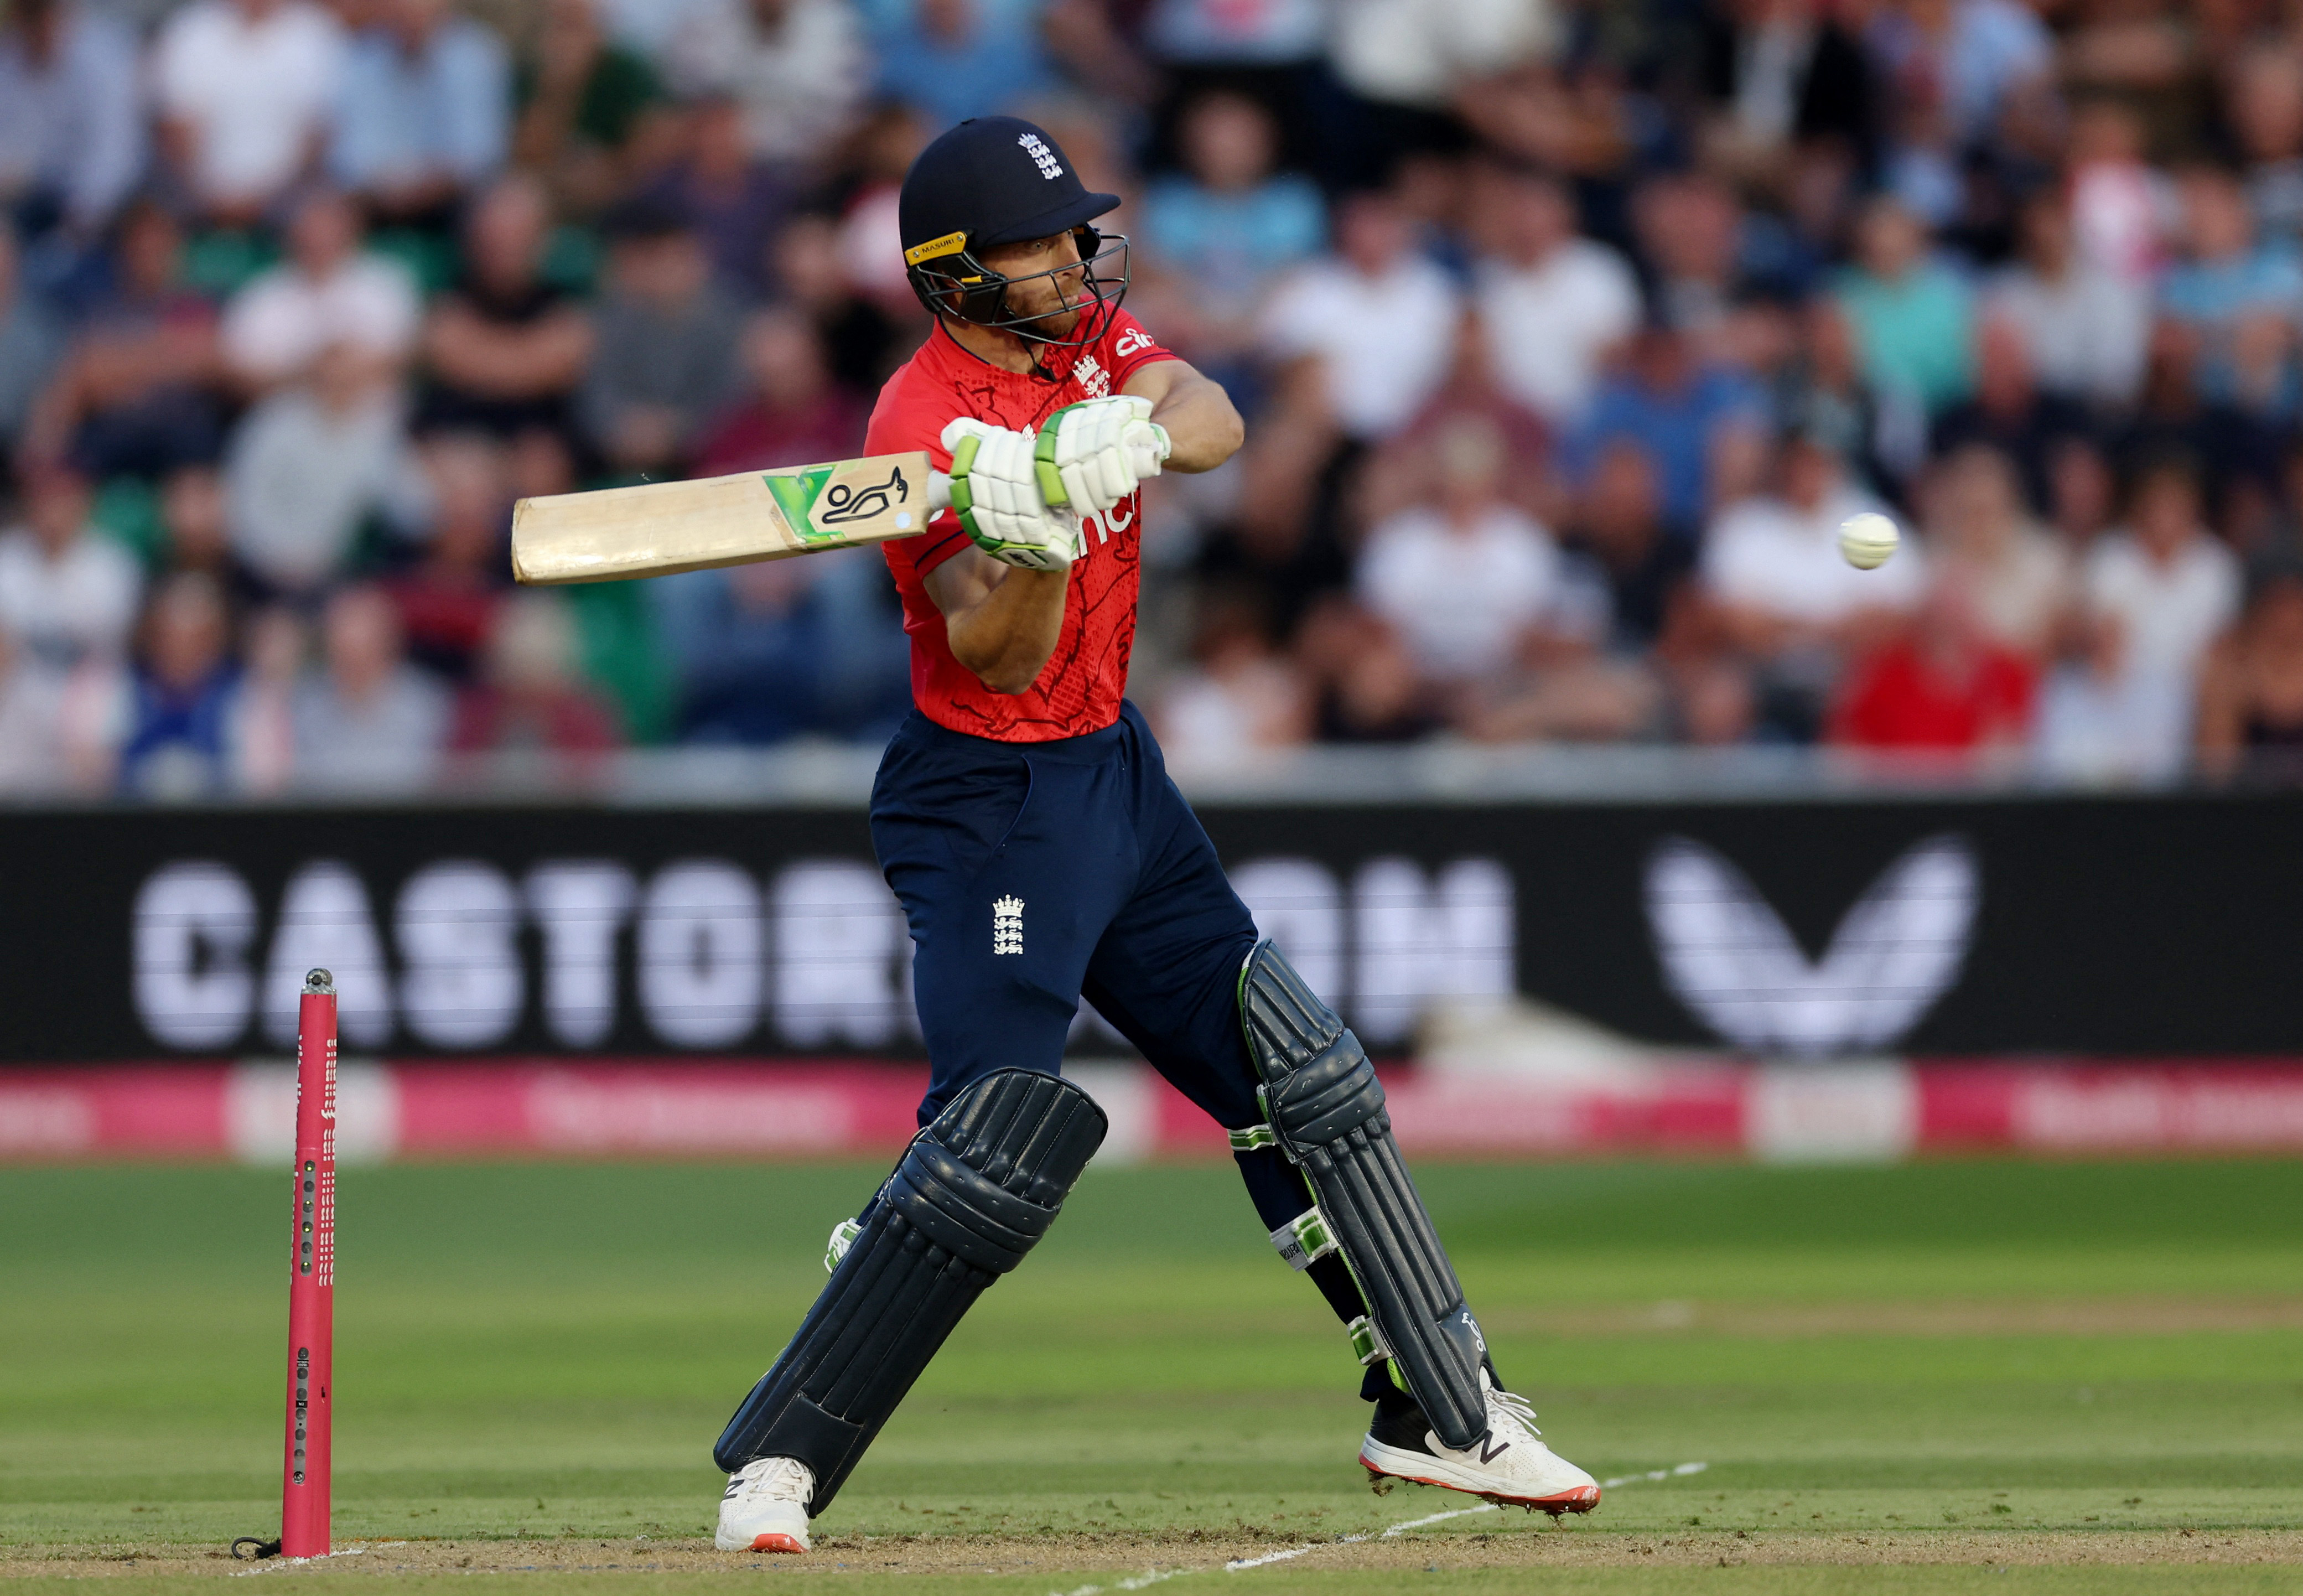 T20 Series - England v South Africa